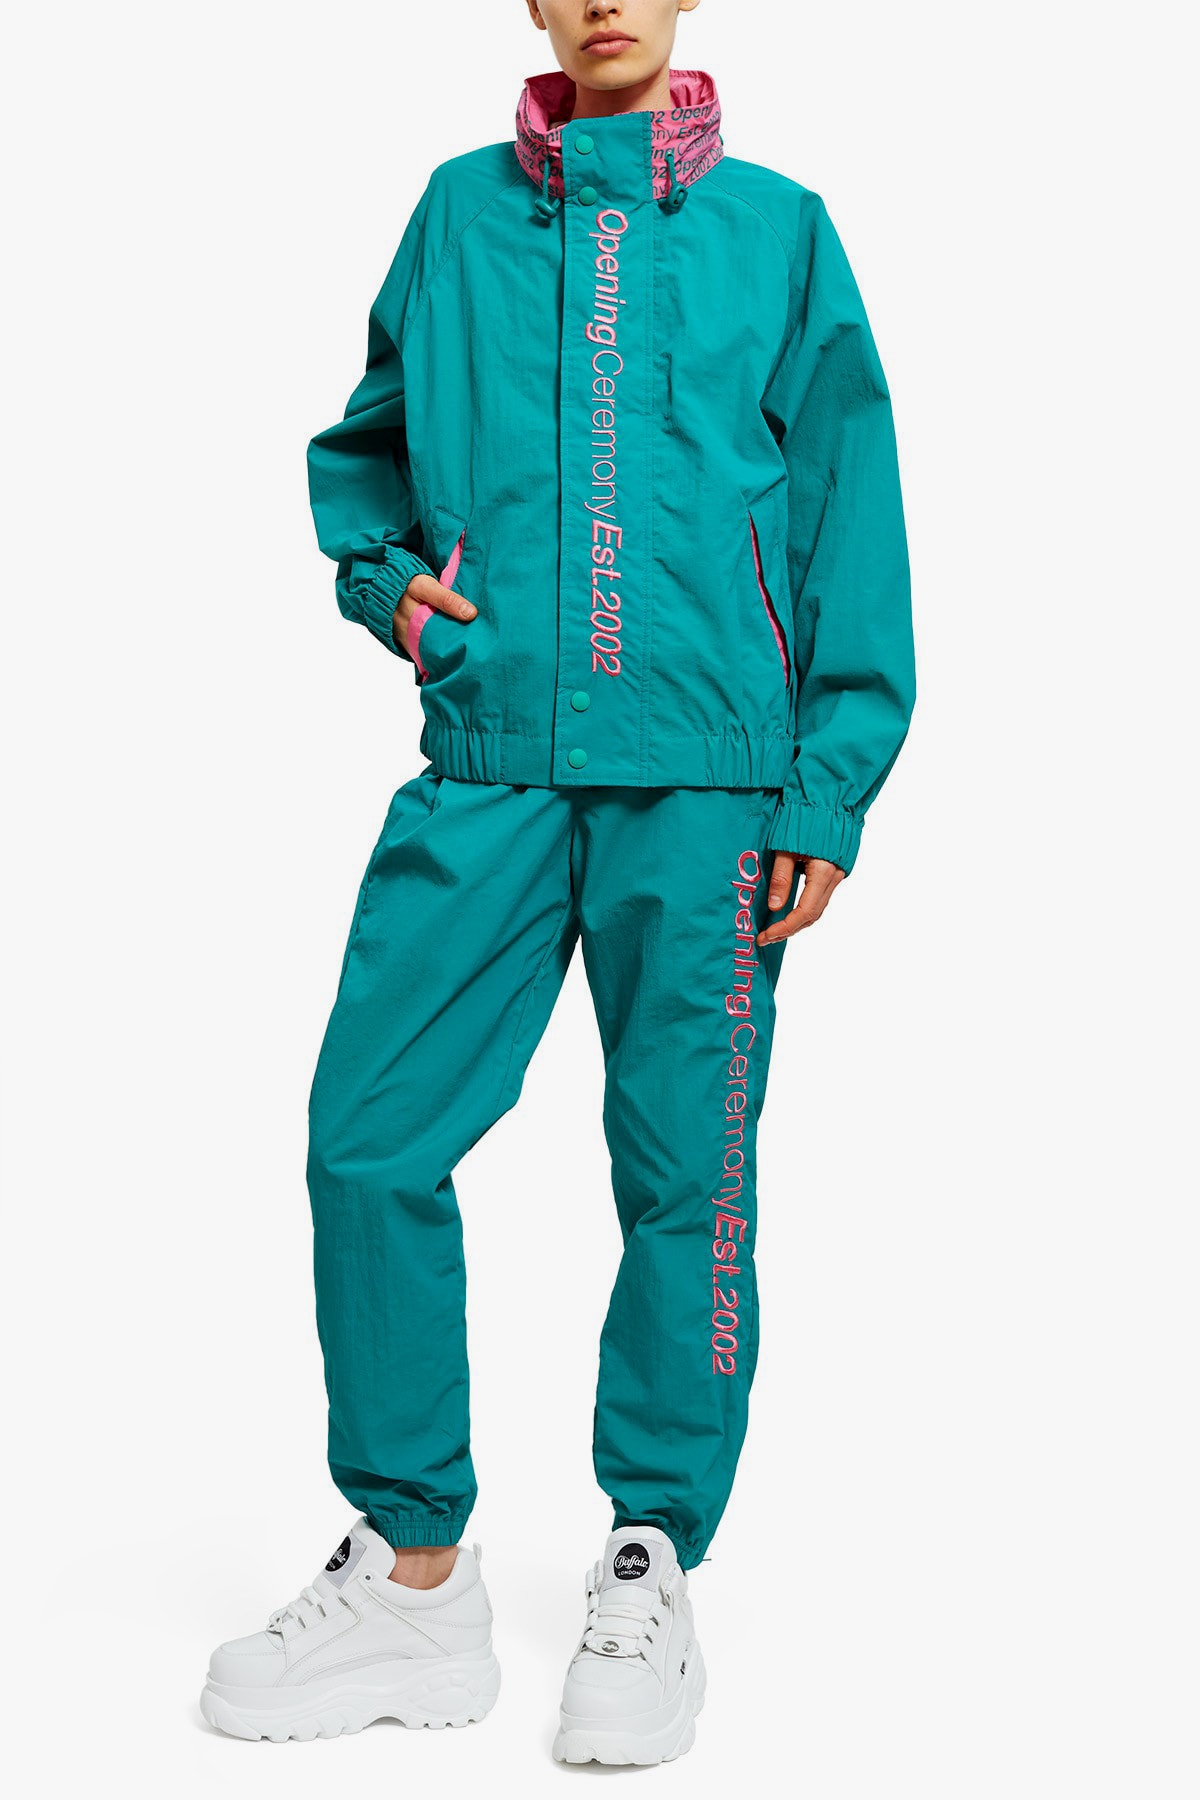 Opening Ceremony Wind Jacket Teal Green